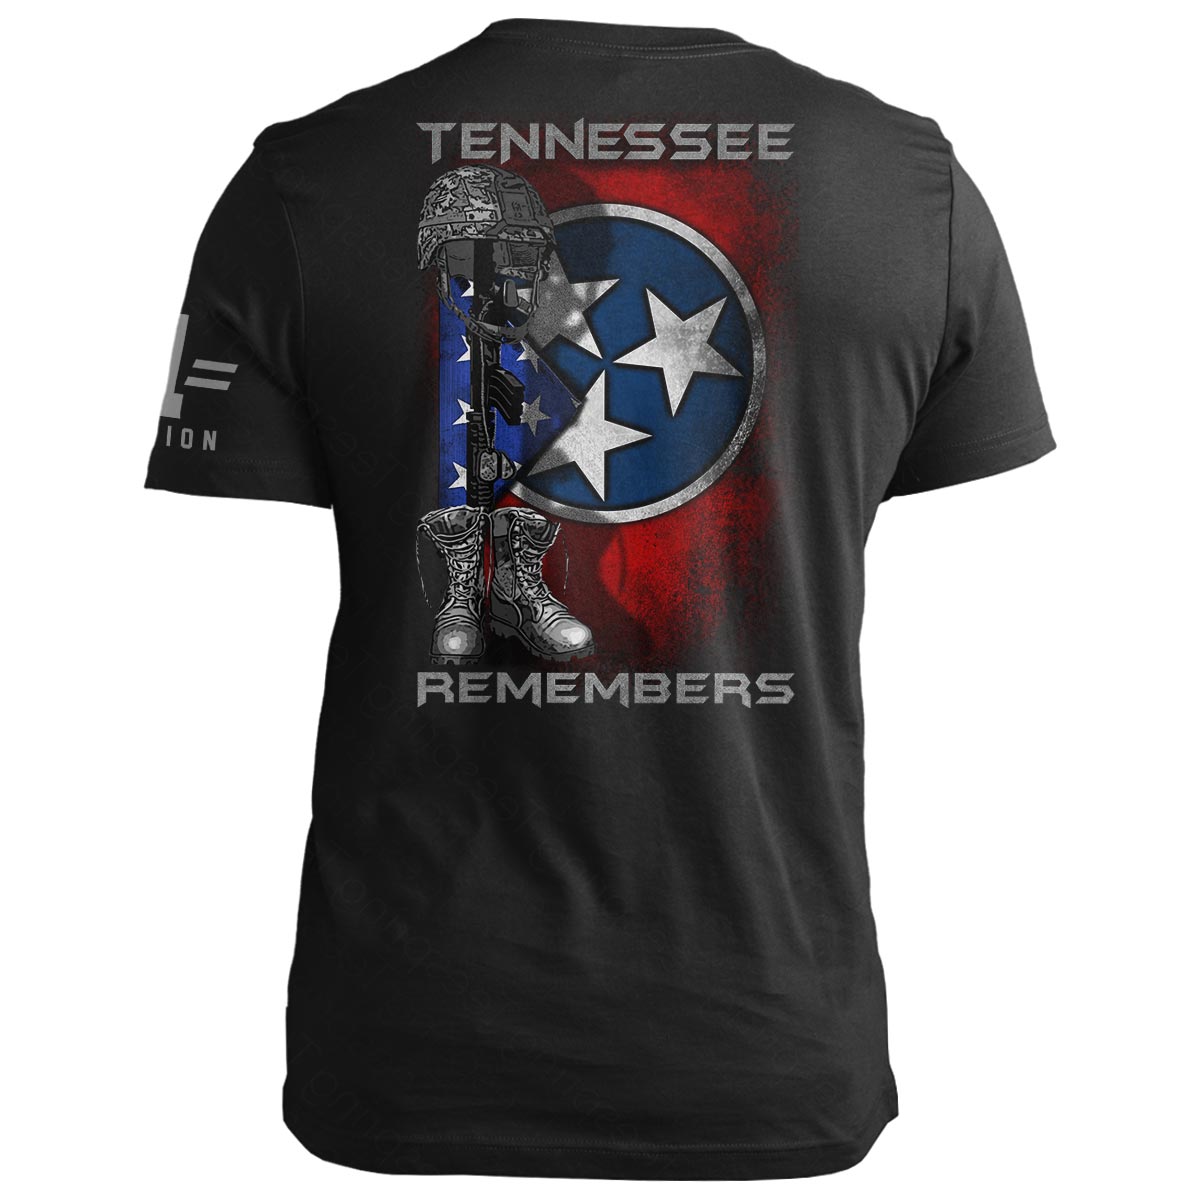 Tennessee Remembers